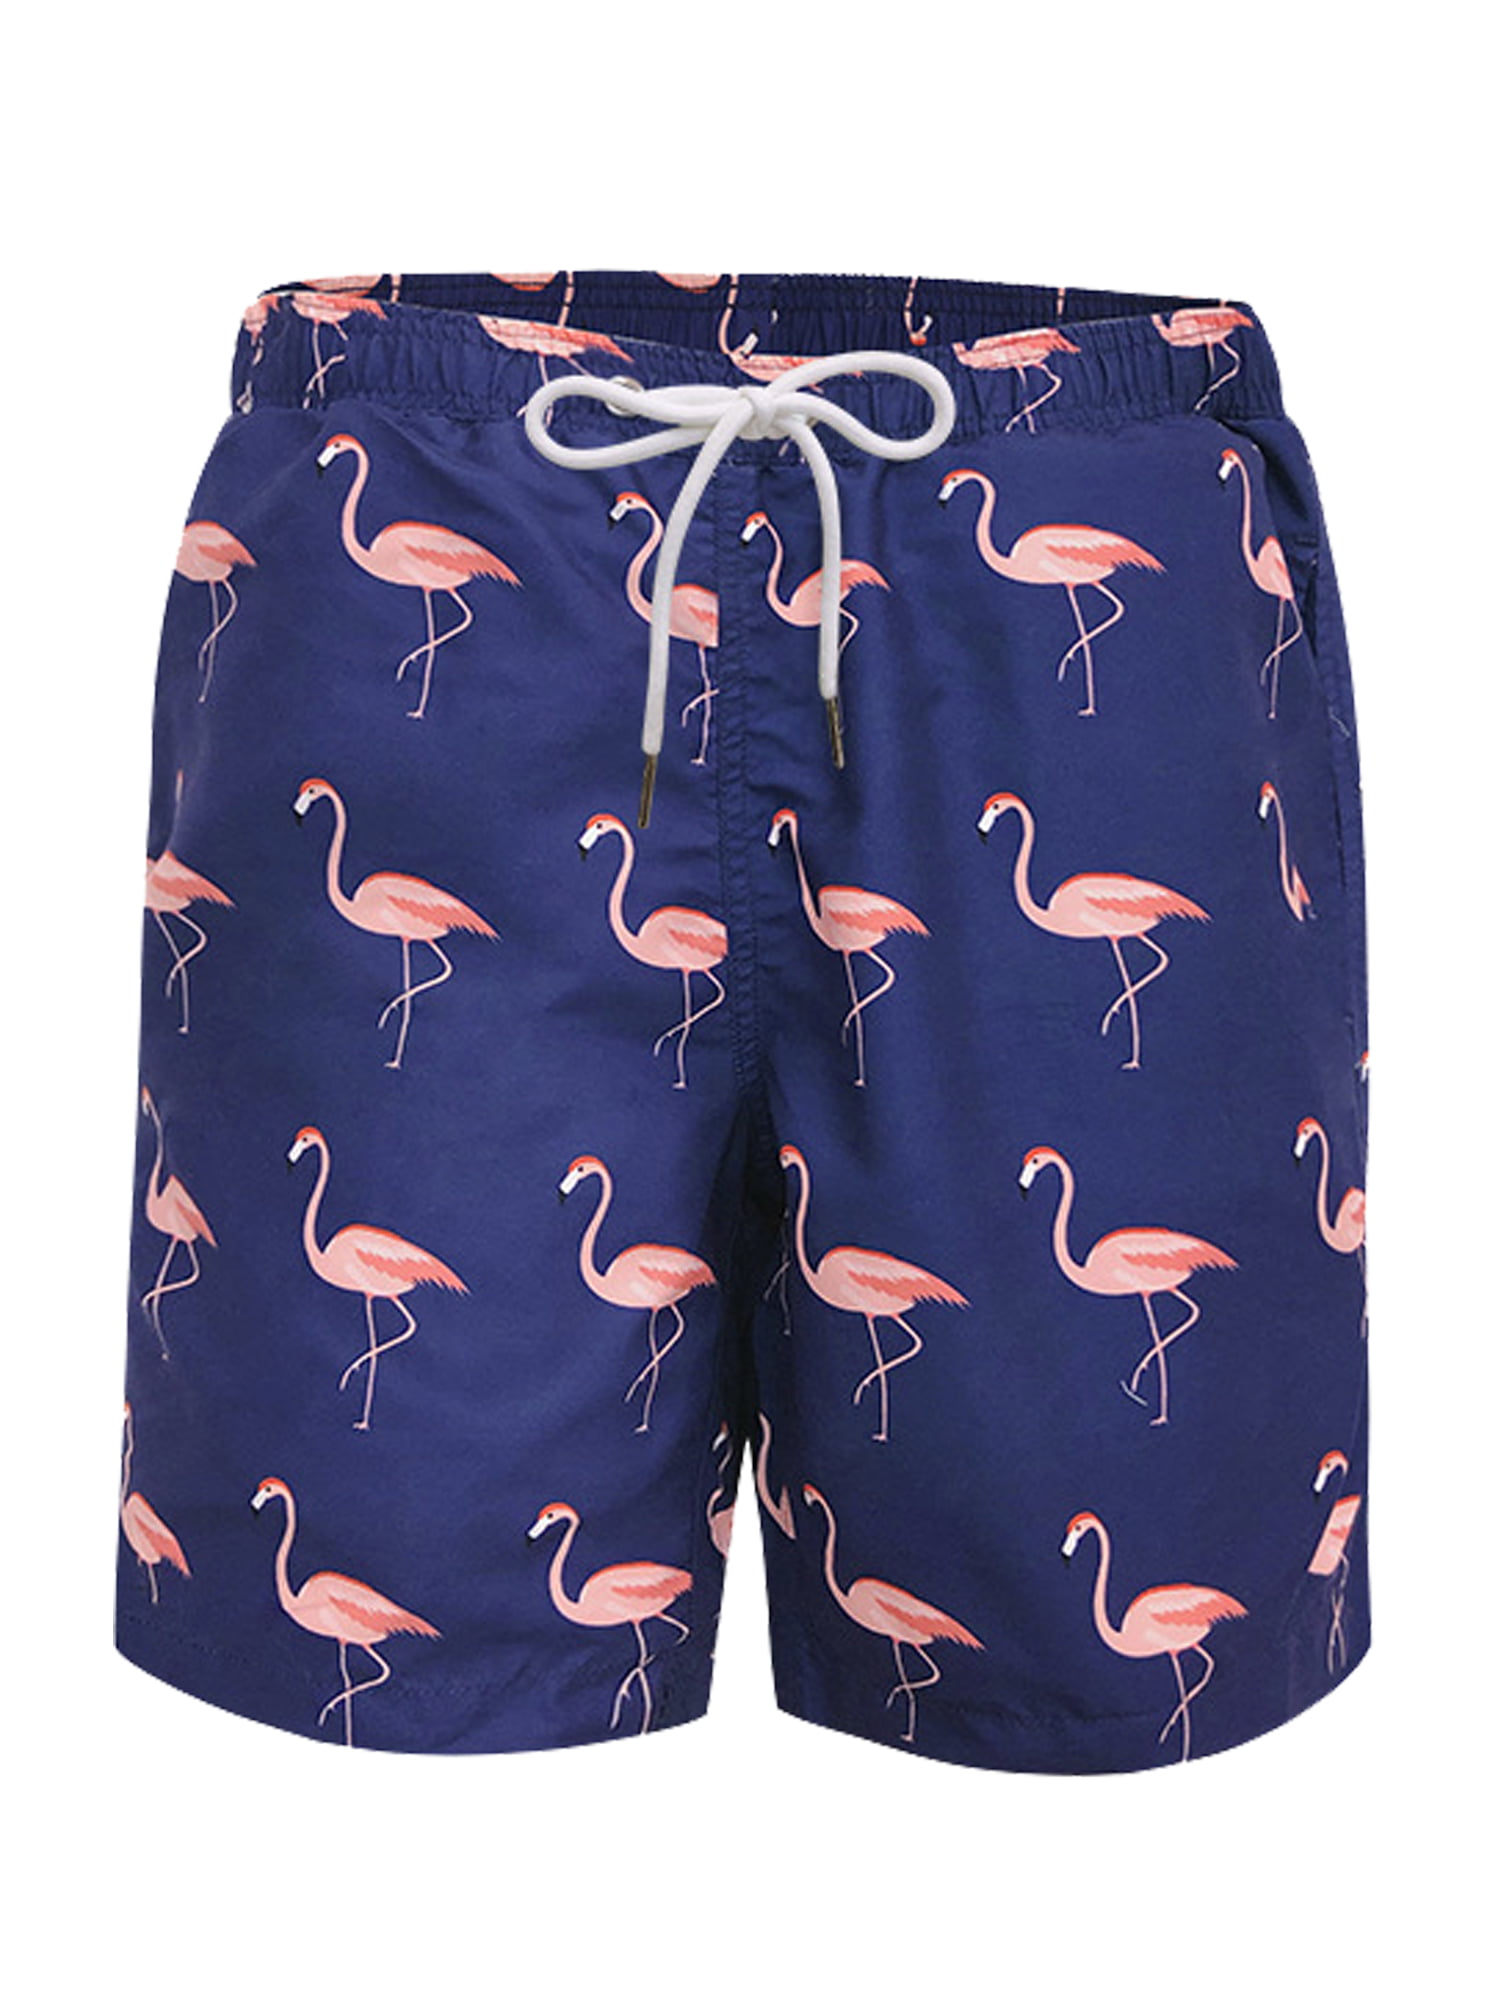 Mens Beach Shorts Coral Reef Tropical Fish Summer Casual Quick Dry Short Pants Stretch Swimming Trunks with Pocket